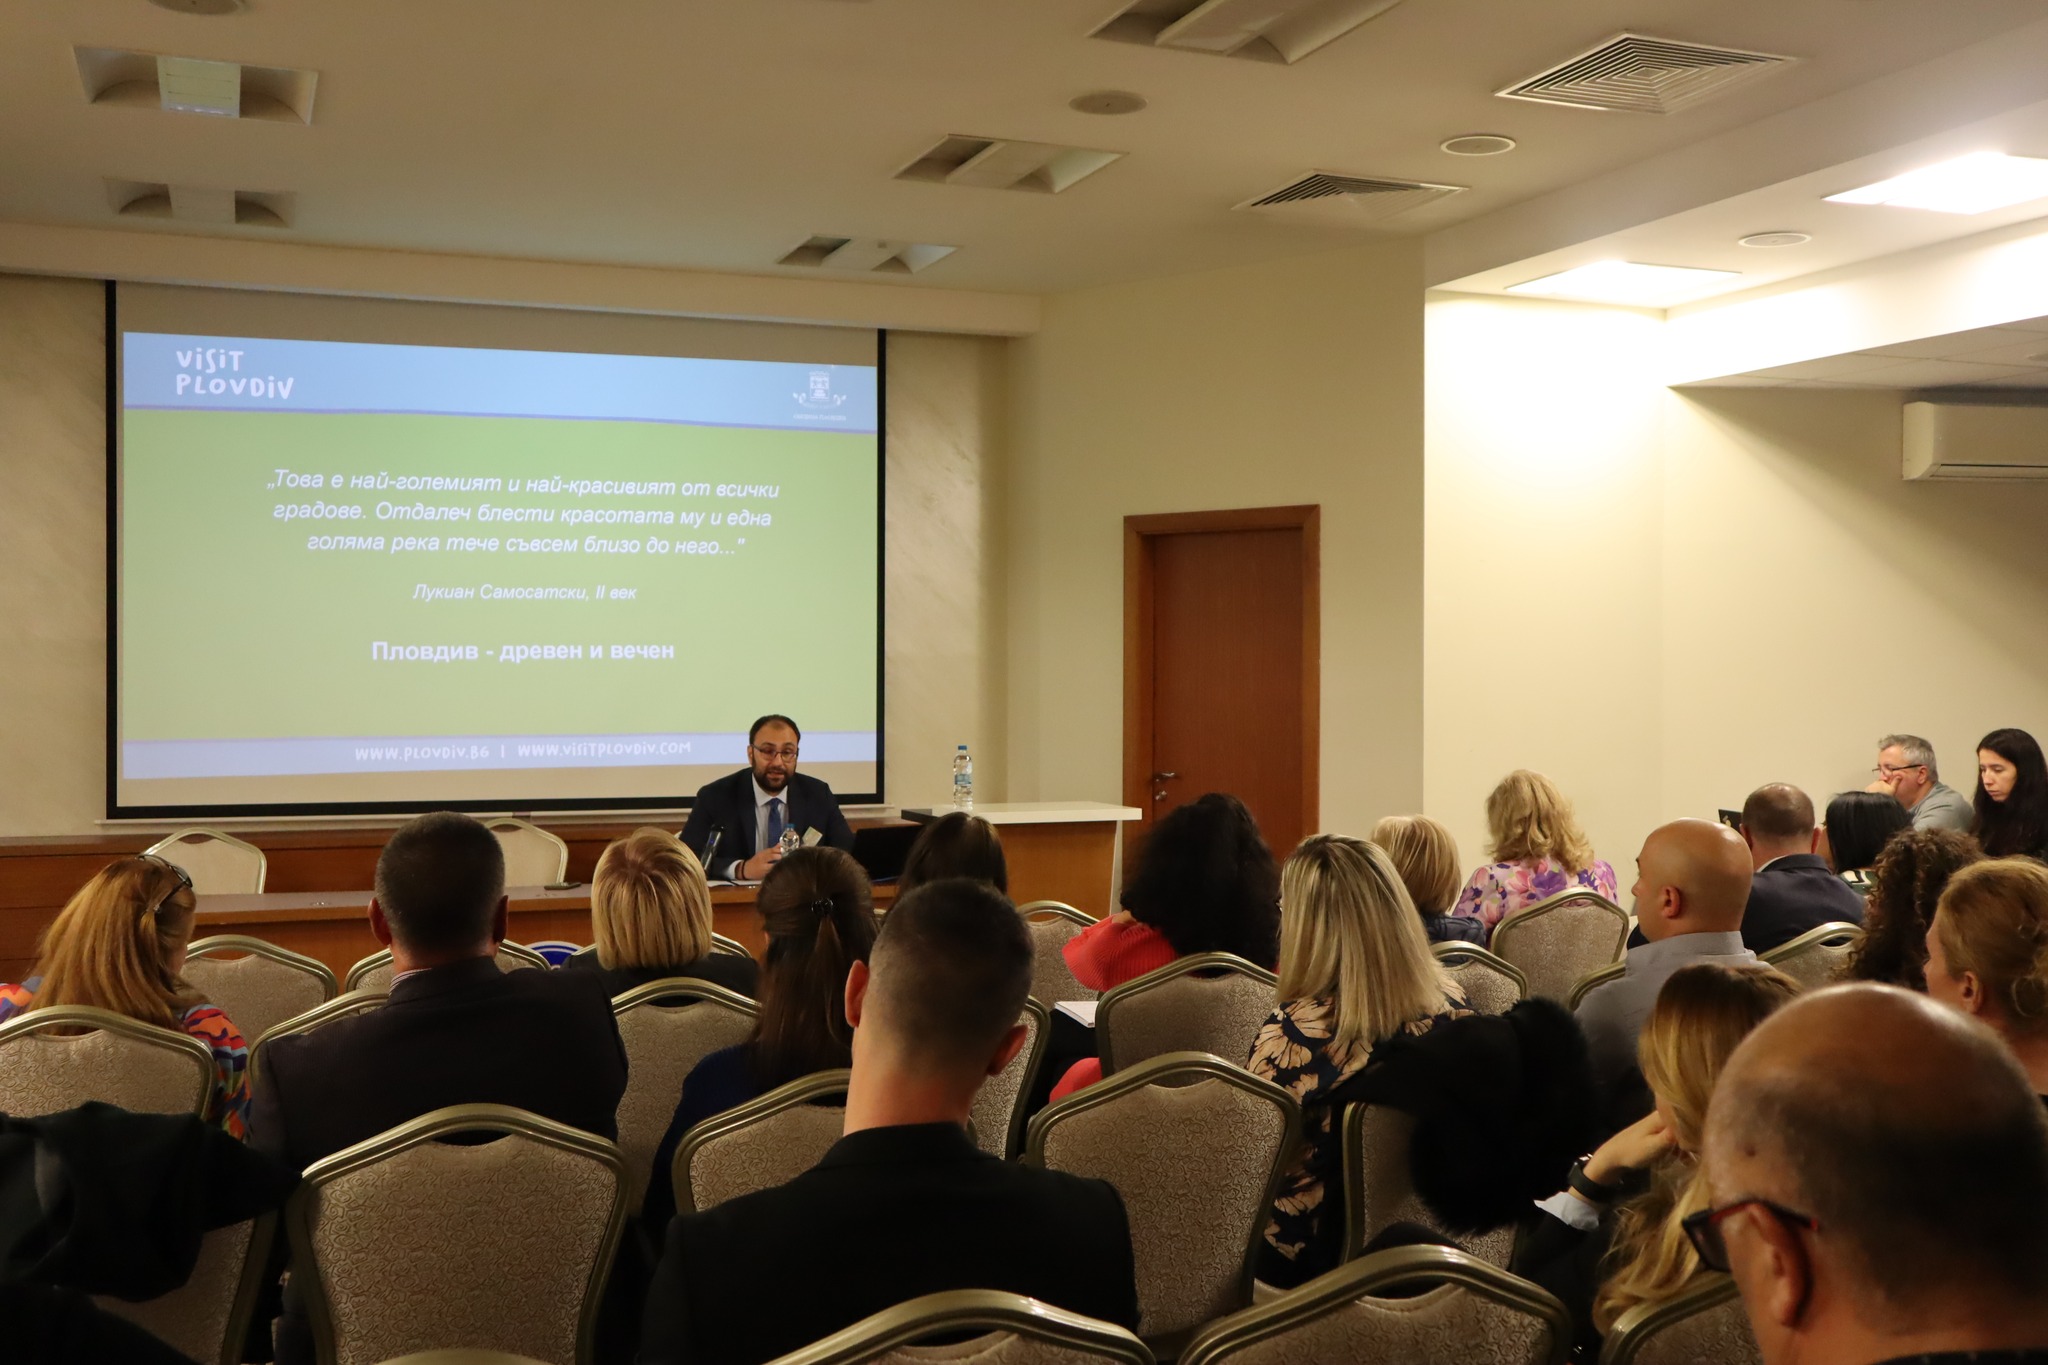 Plovdiv hosts the 9th Annual Meeting of Tourism Business and Local Government